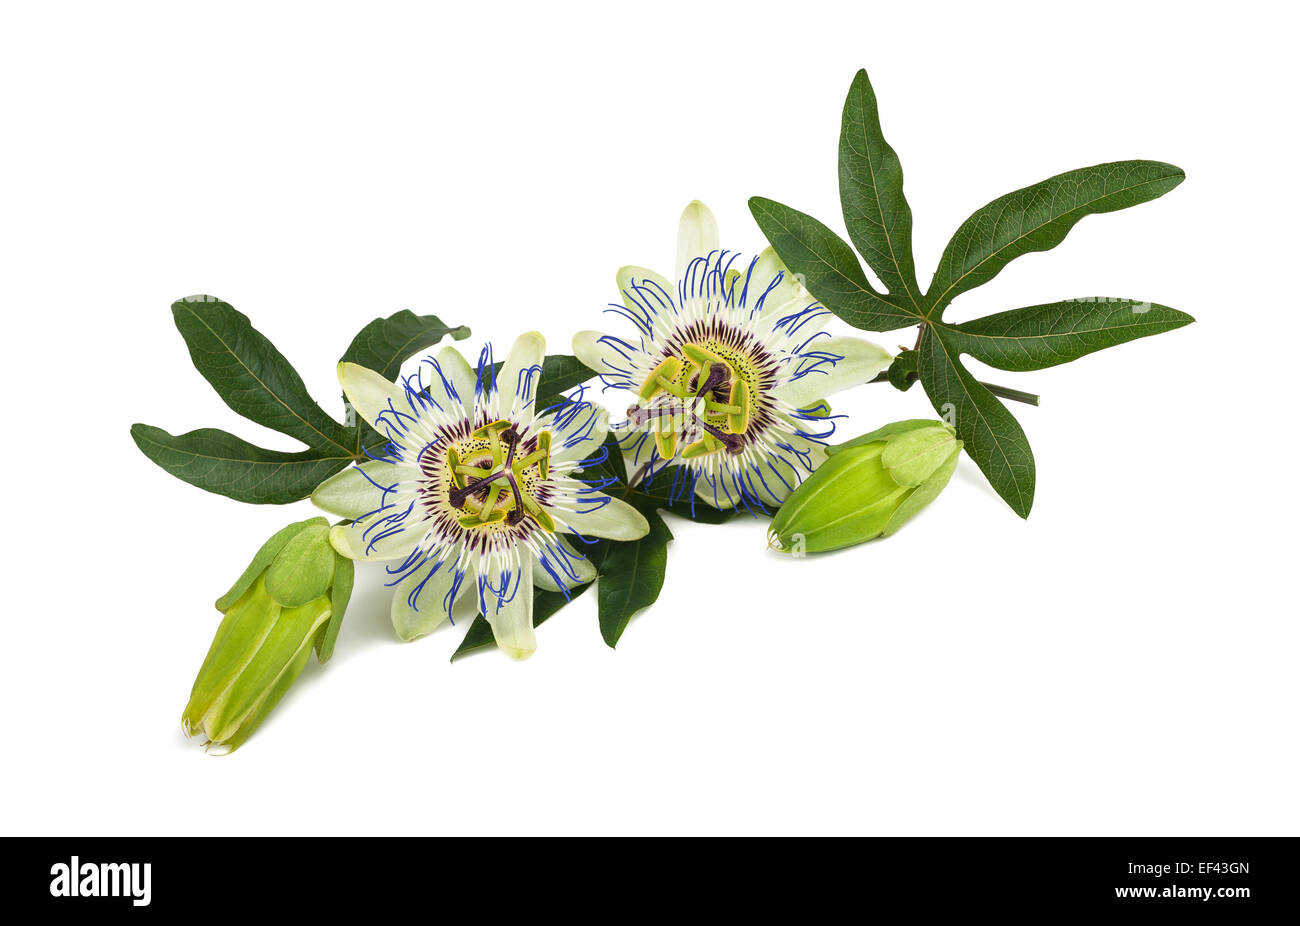 Passion flower (Passiflora) isolated on white background. Stock Photo